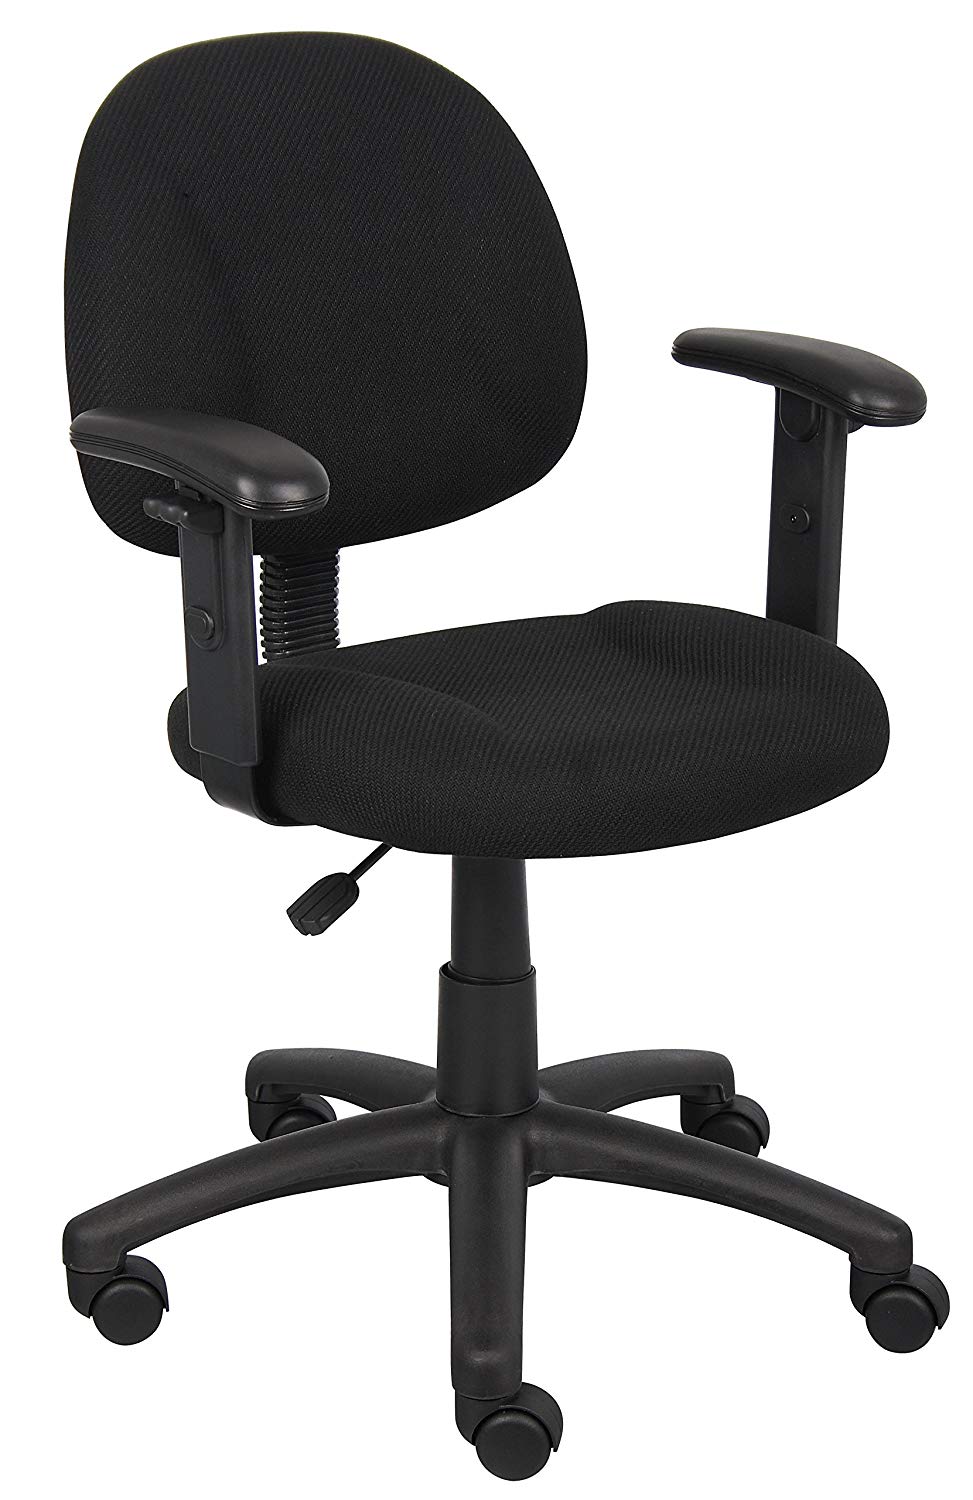 Best Budget Office Chair 2020 Take A Look At Our Buying Guide